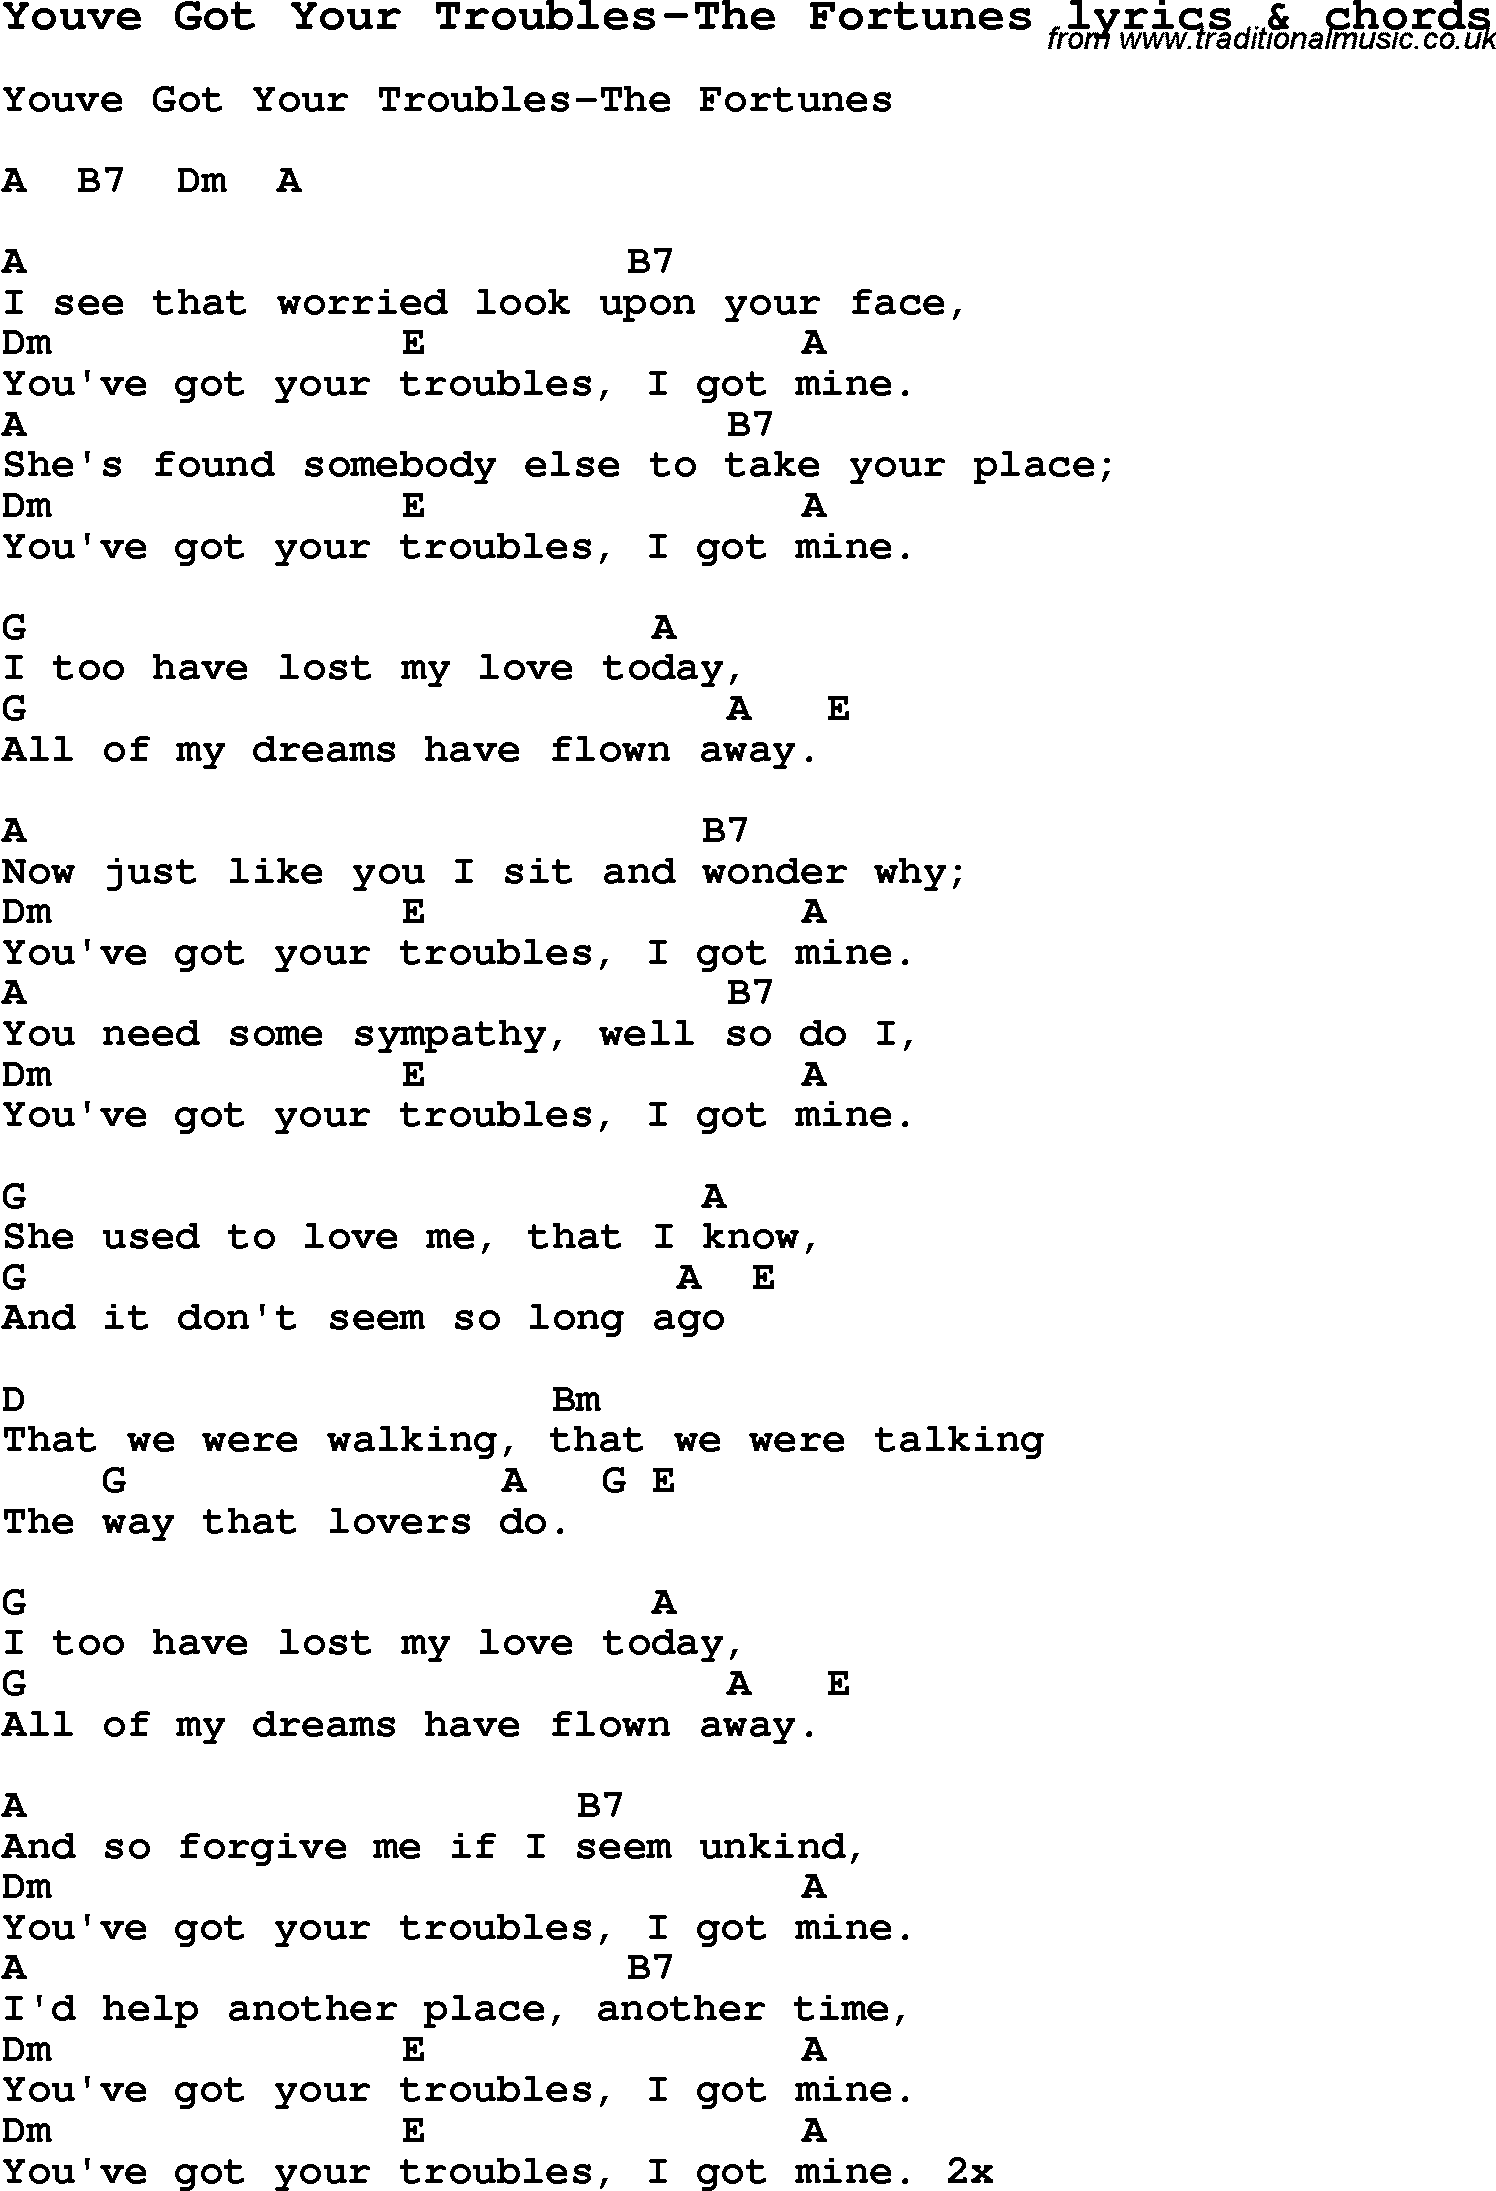 Love Song Lyrics for: Youve Got Your Troubles-The Fortunes with chords for Ukulele, Guitar Banjo etc.